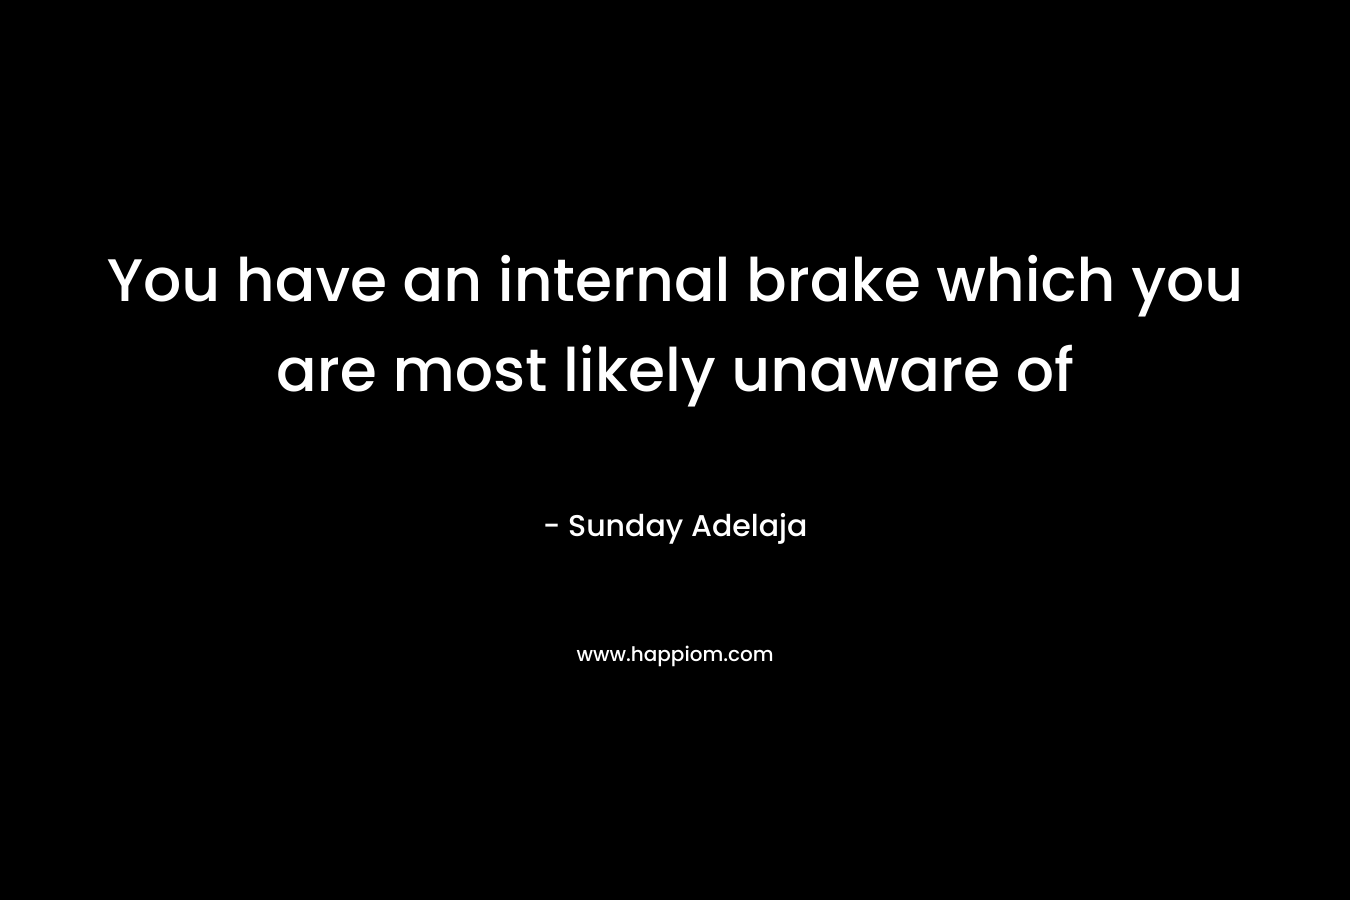 You have an internal brake which you are most likely unaware of